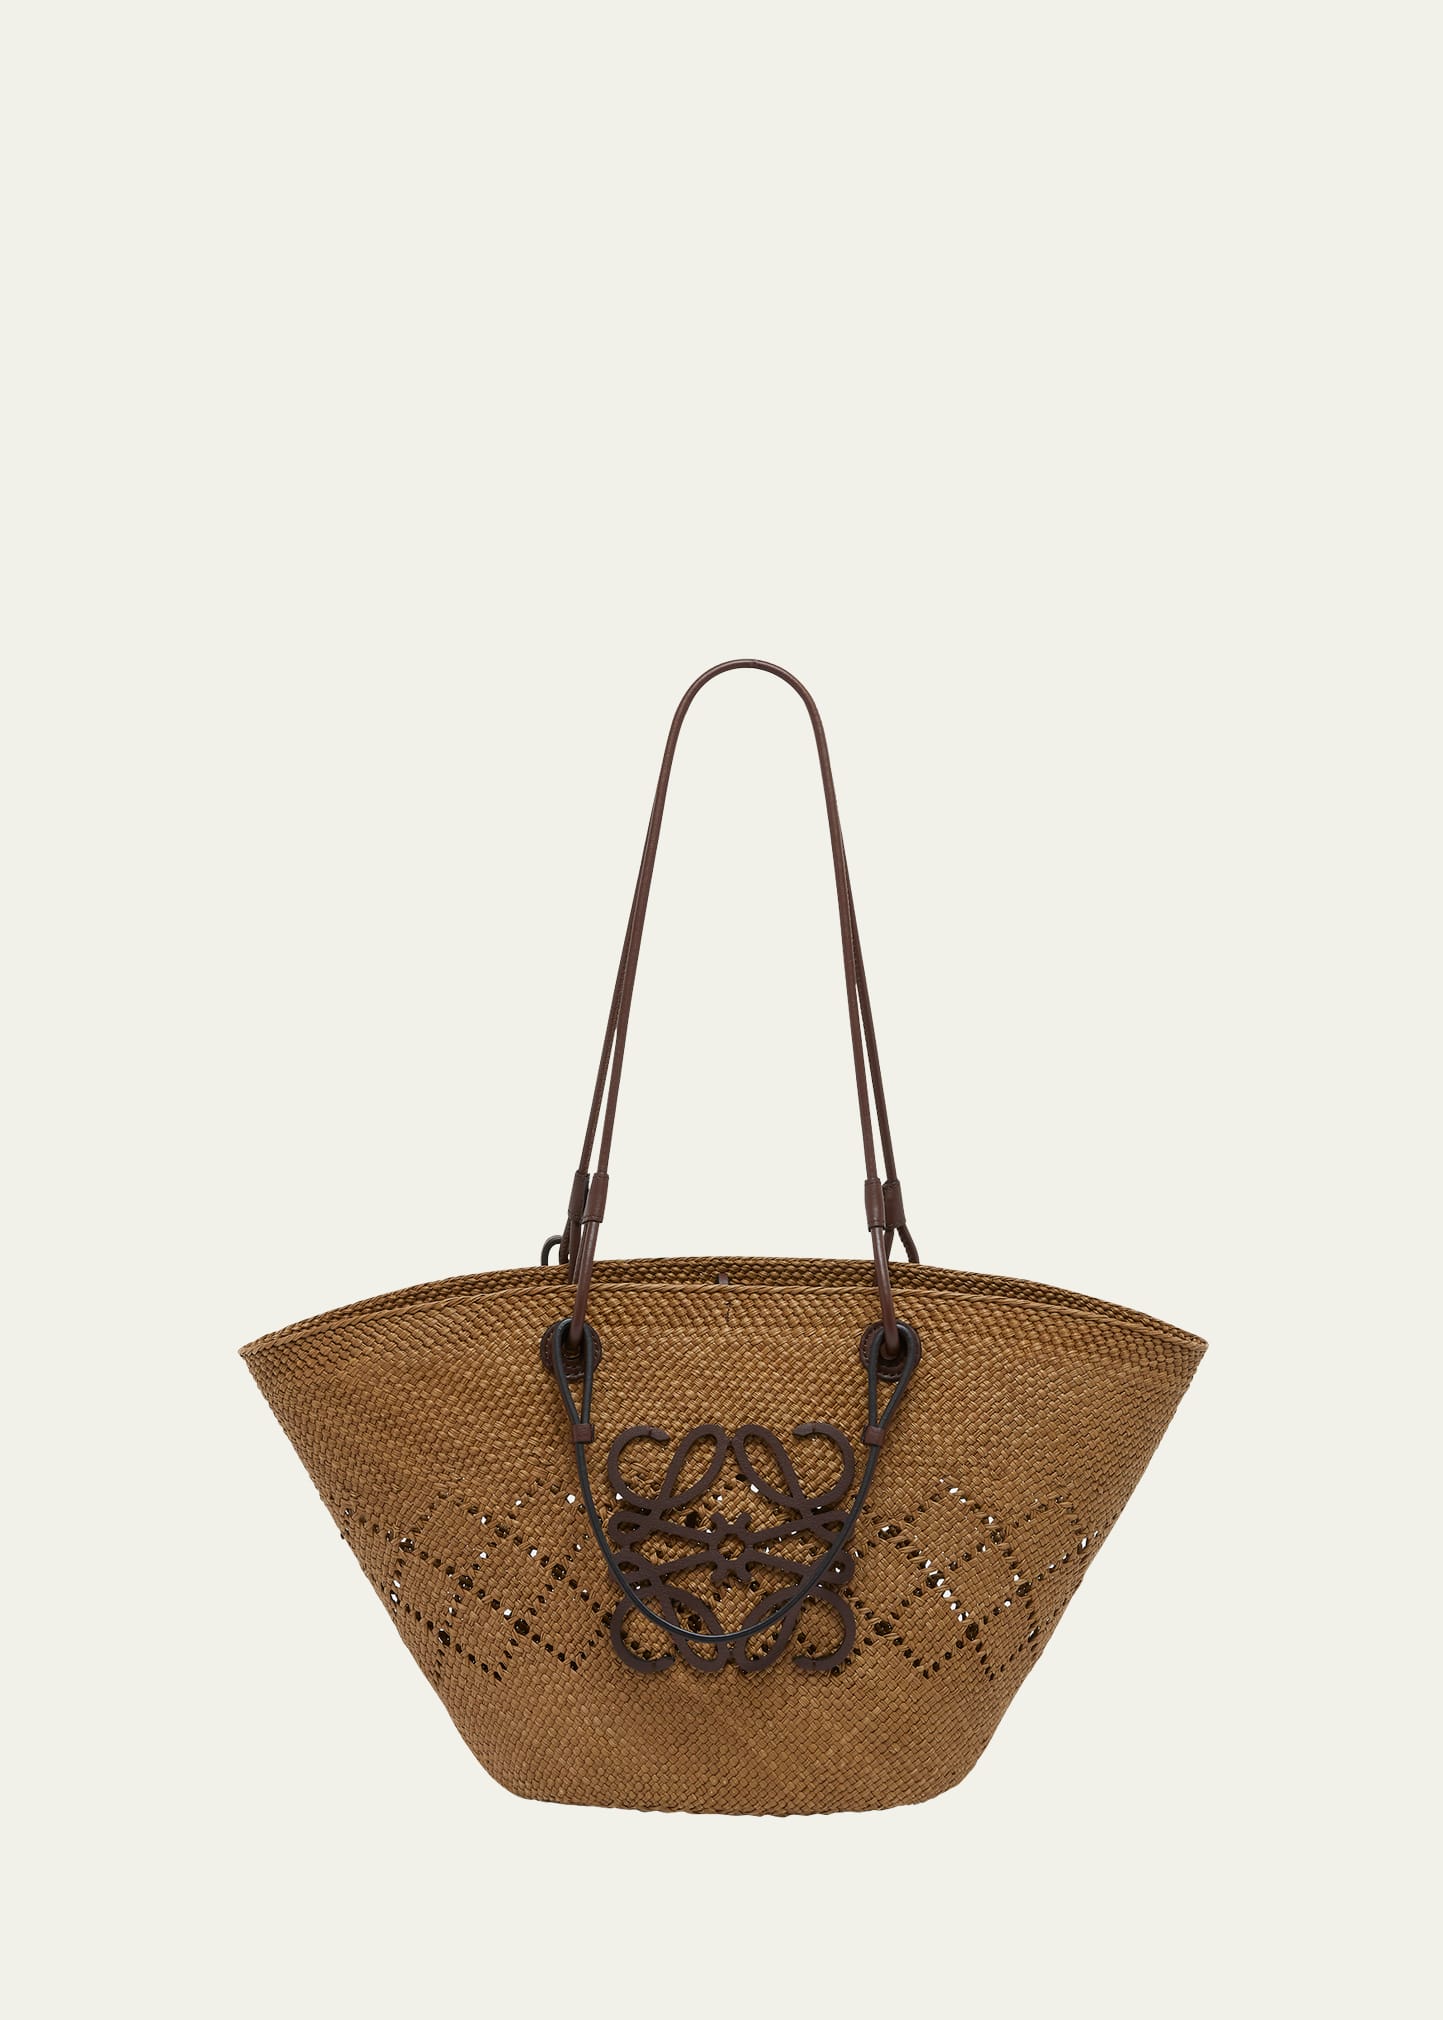 x Paula's Ibiza Medium Anagram Basket Tote Bag in Iraca Palm with Leather Handles